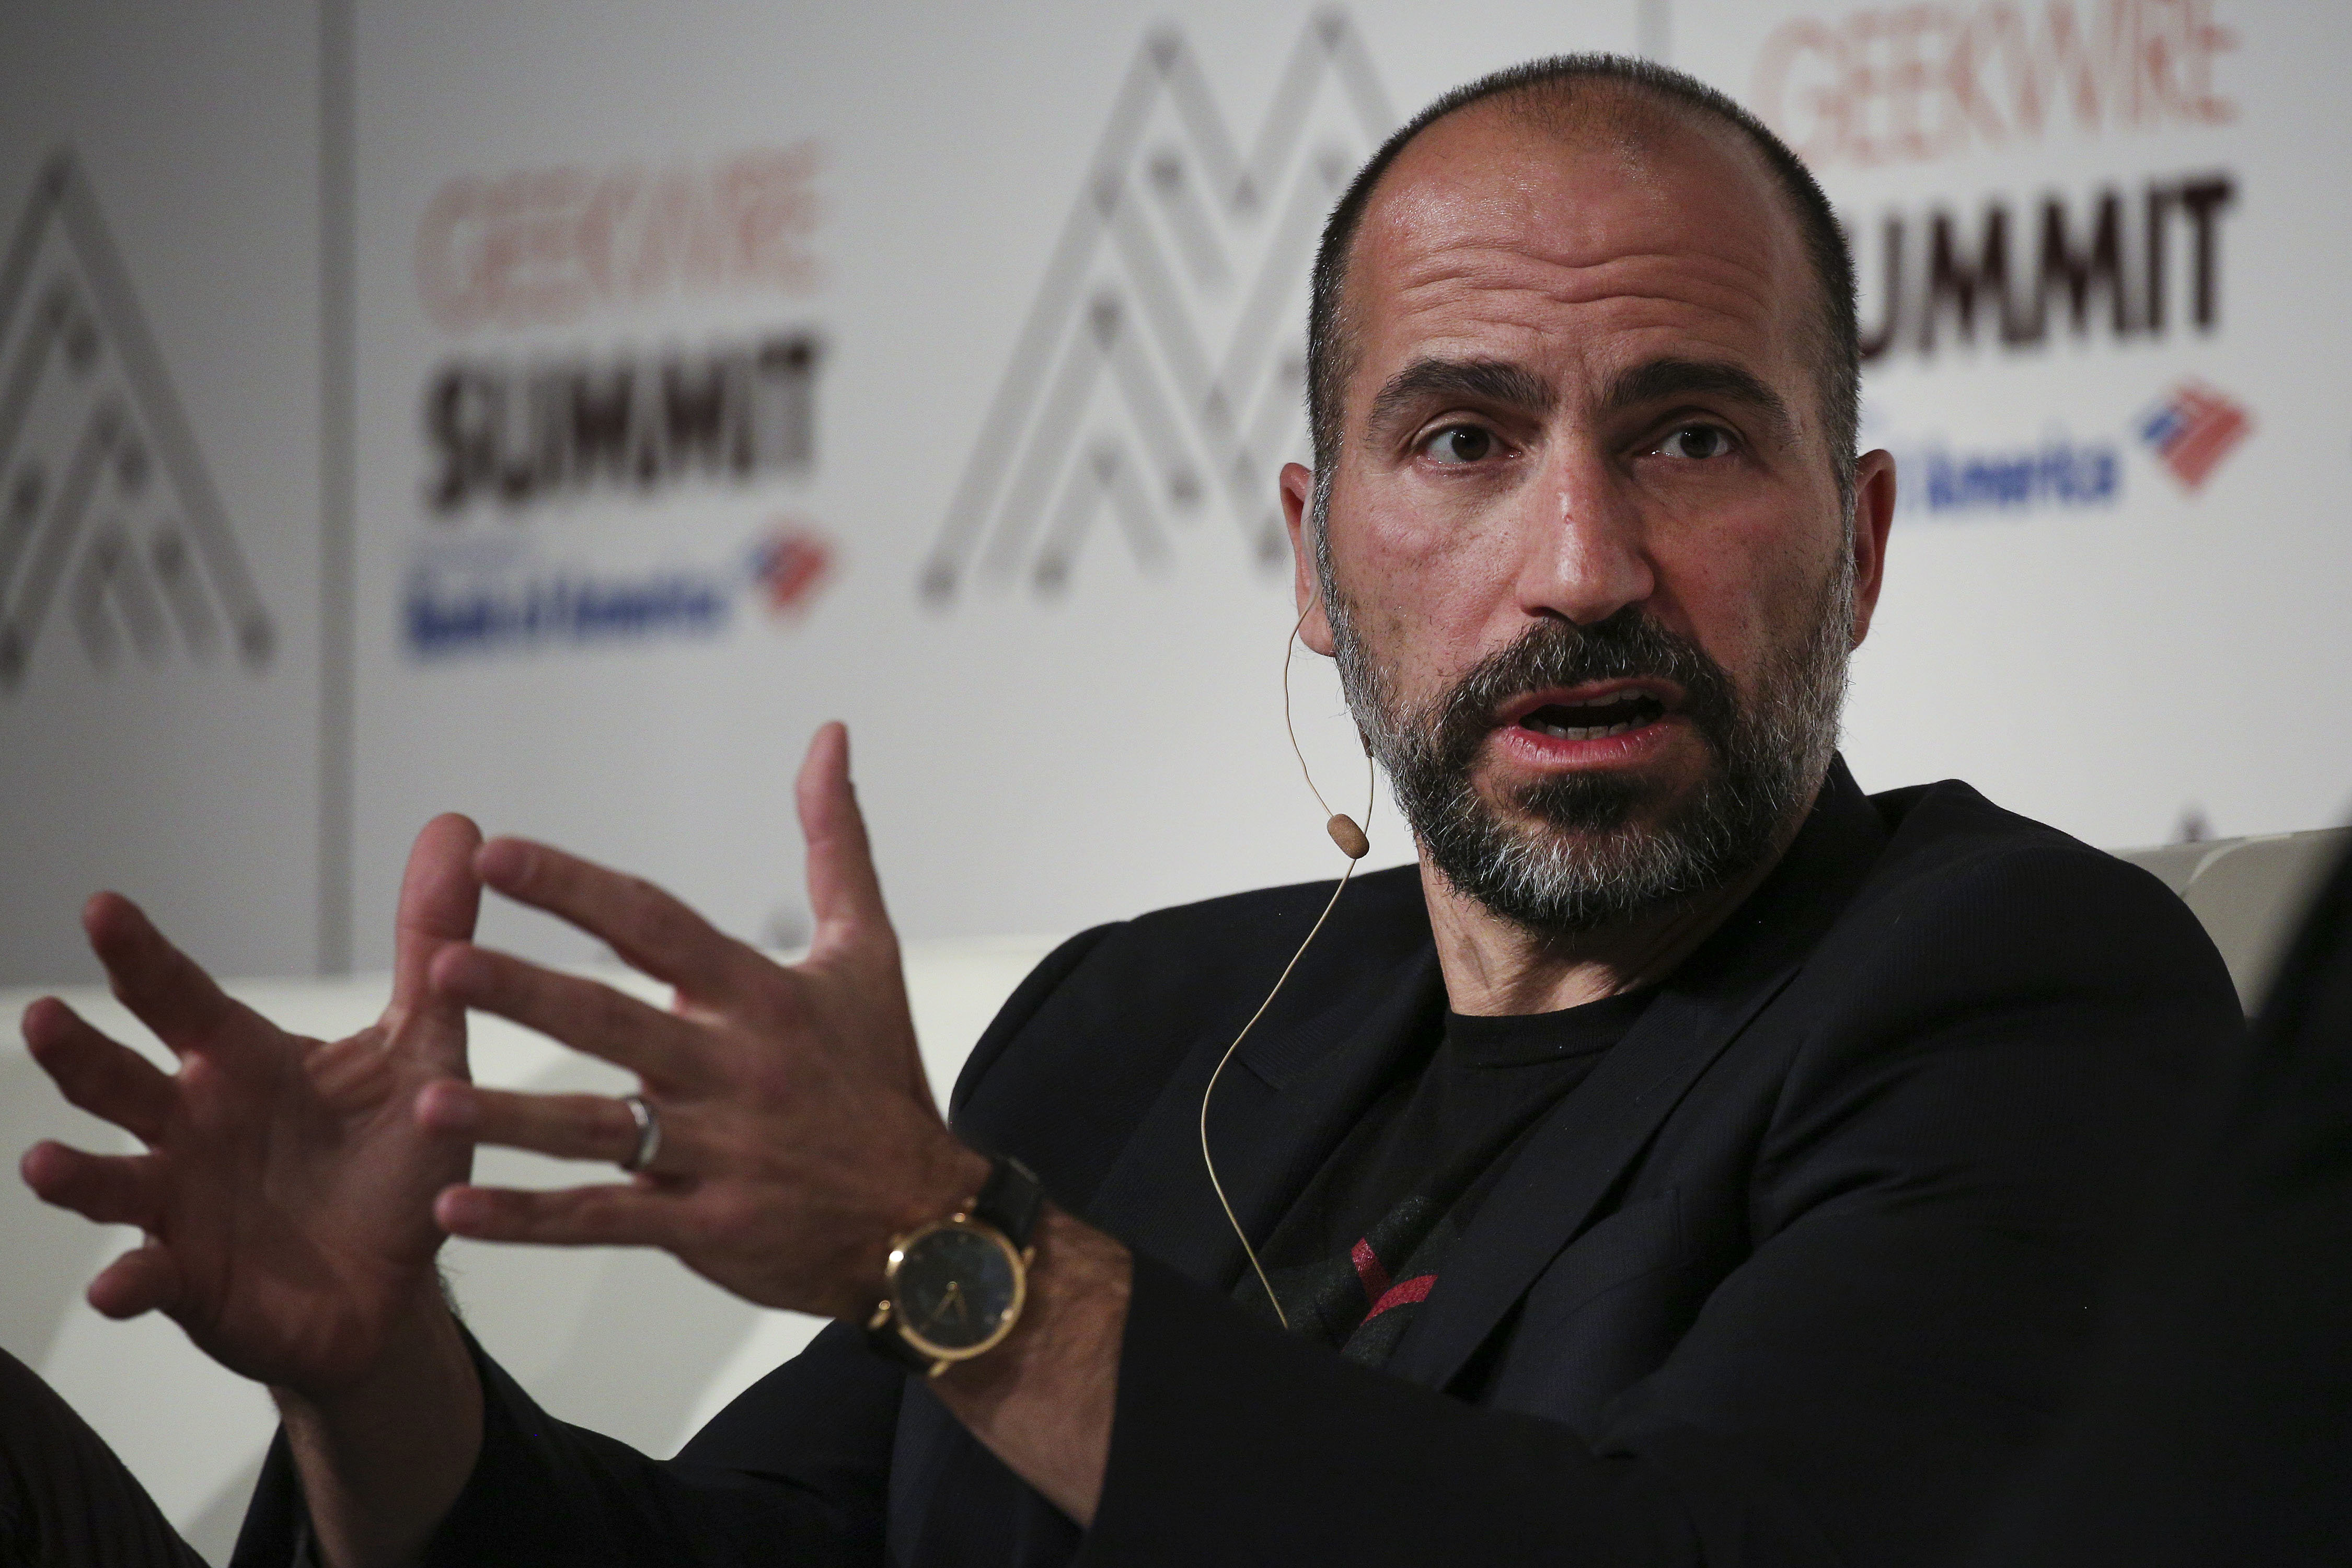 <strong>Uber CEO&nbsp;Dara Khosrowshahi said he would 'not make excuses' for the hack&nbsp;</strong>